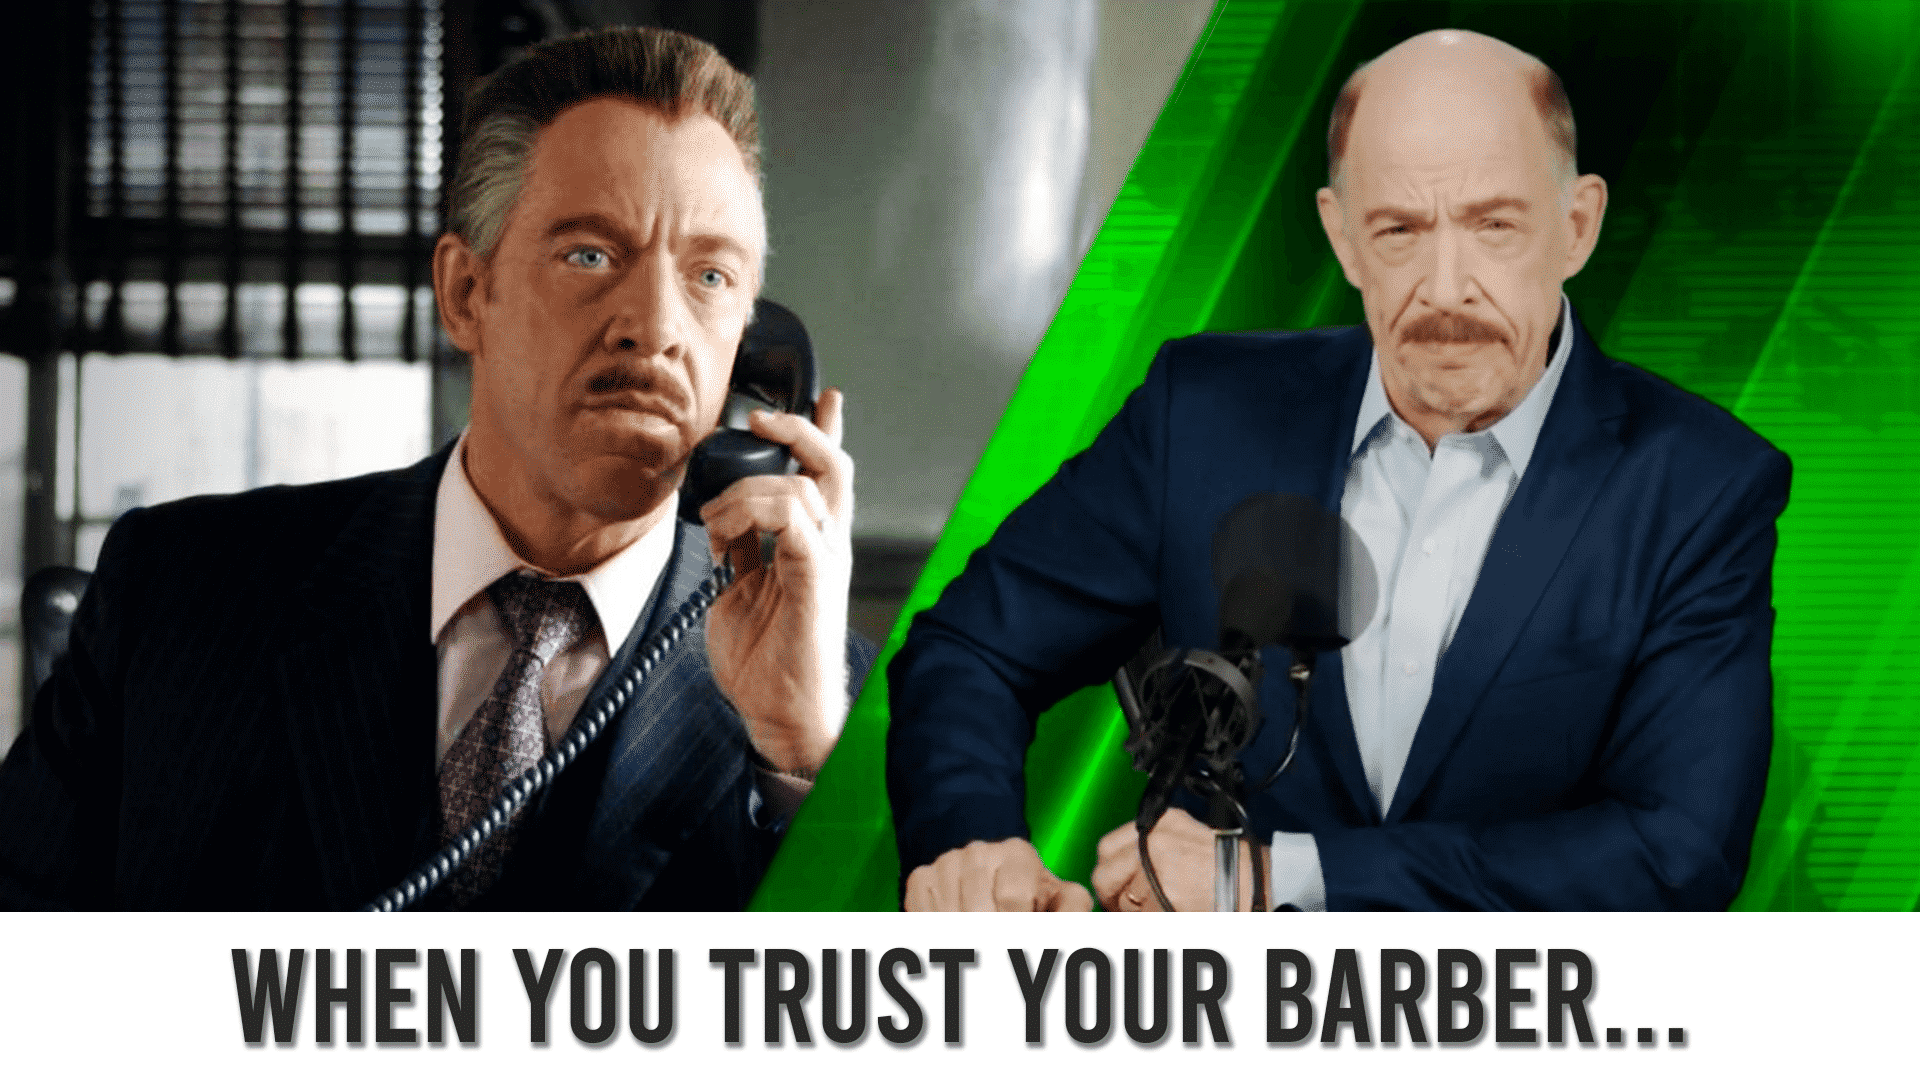 These J Jonah Jameson Memes Will Make You Cry With Laughter